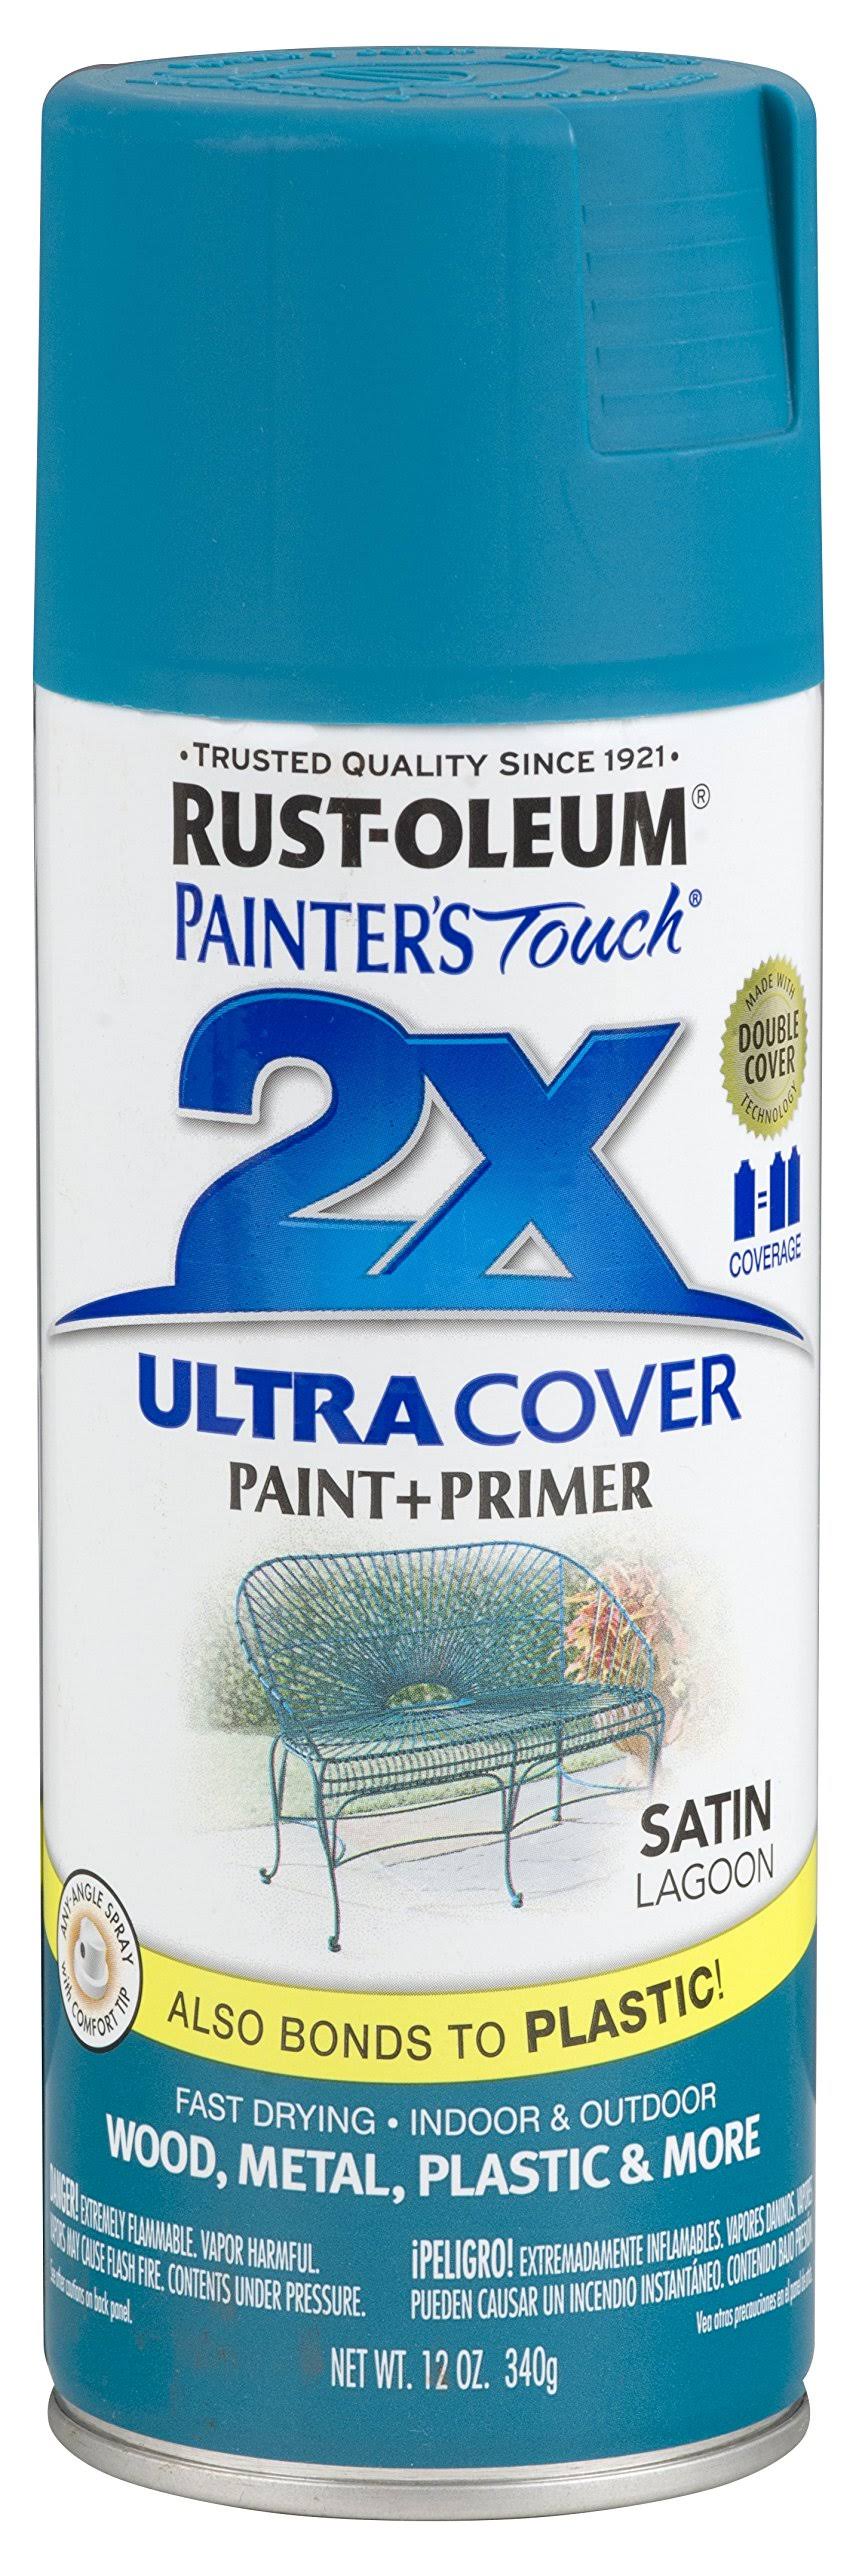 Rust-Oleum 257461 Painters Touch 2 x Ultra Cover - 12oz